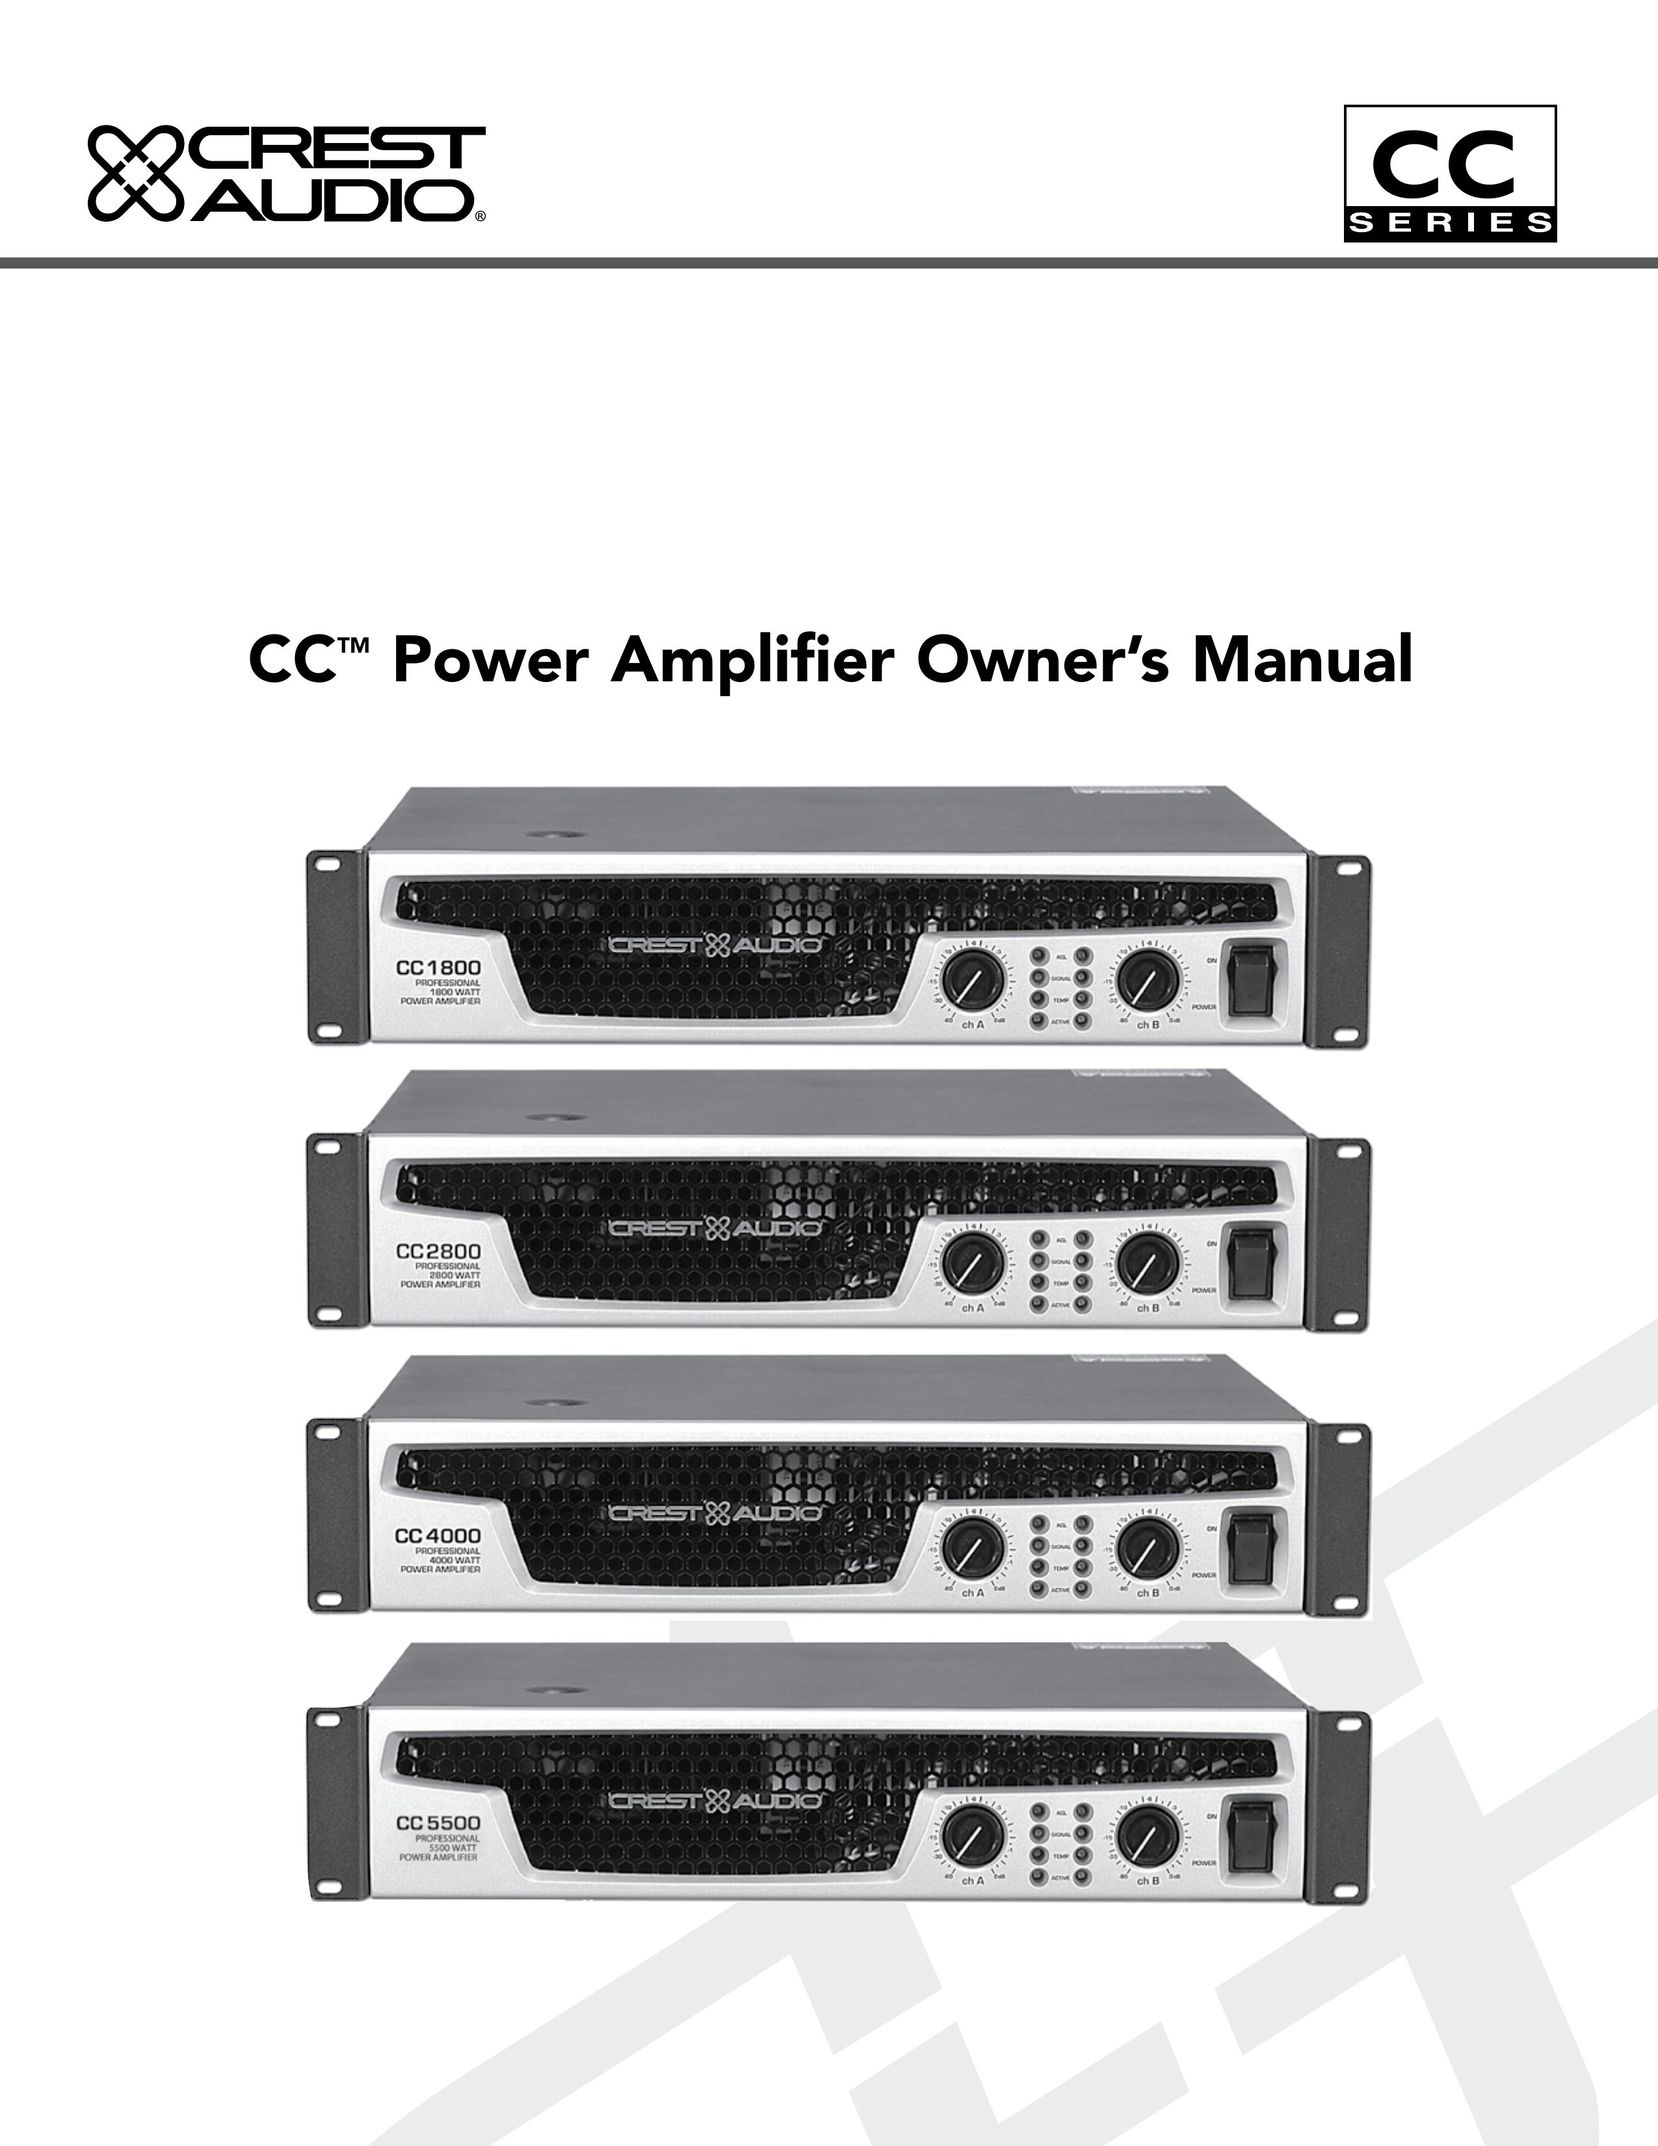 Crest Audio CC 5500 Stereo Amplifier User Manual